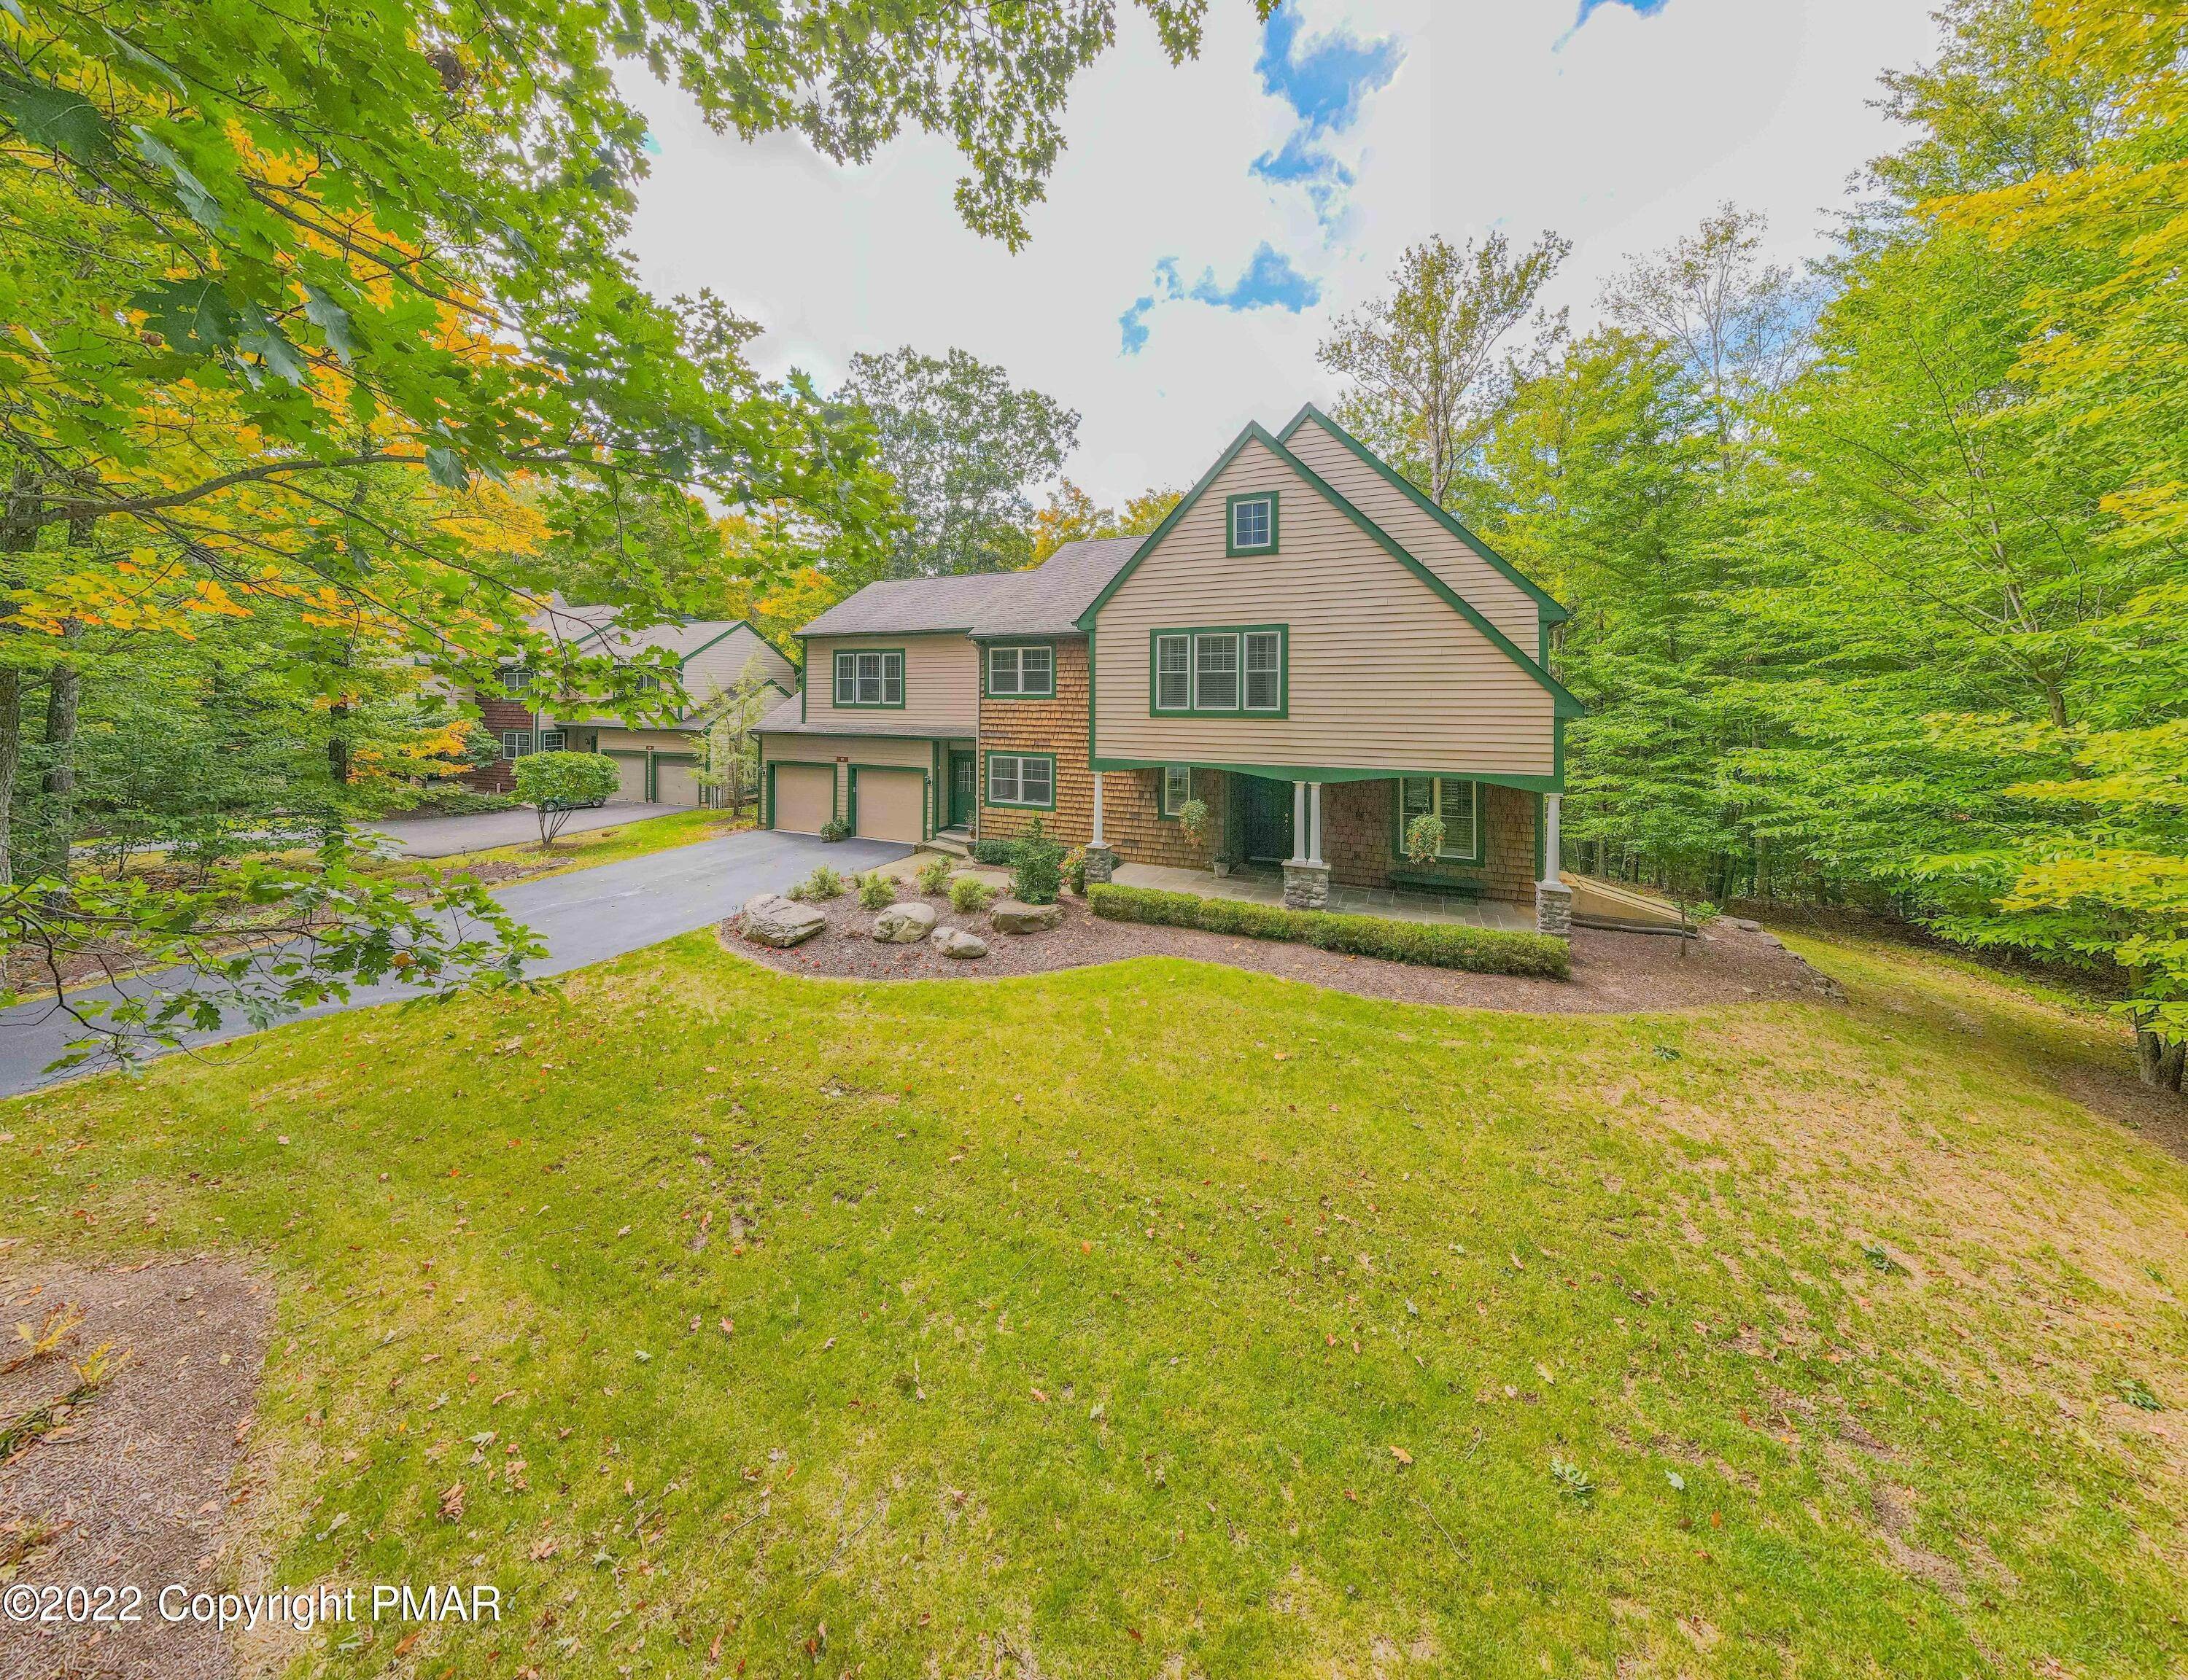 70. Single Family Homes for Sale at 131 Creekside Rd Buck Hill Falls, Pennsylvania 18323 United States